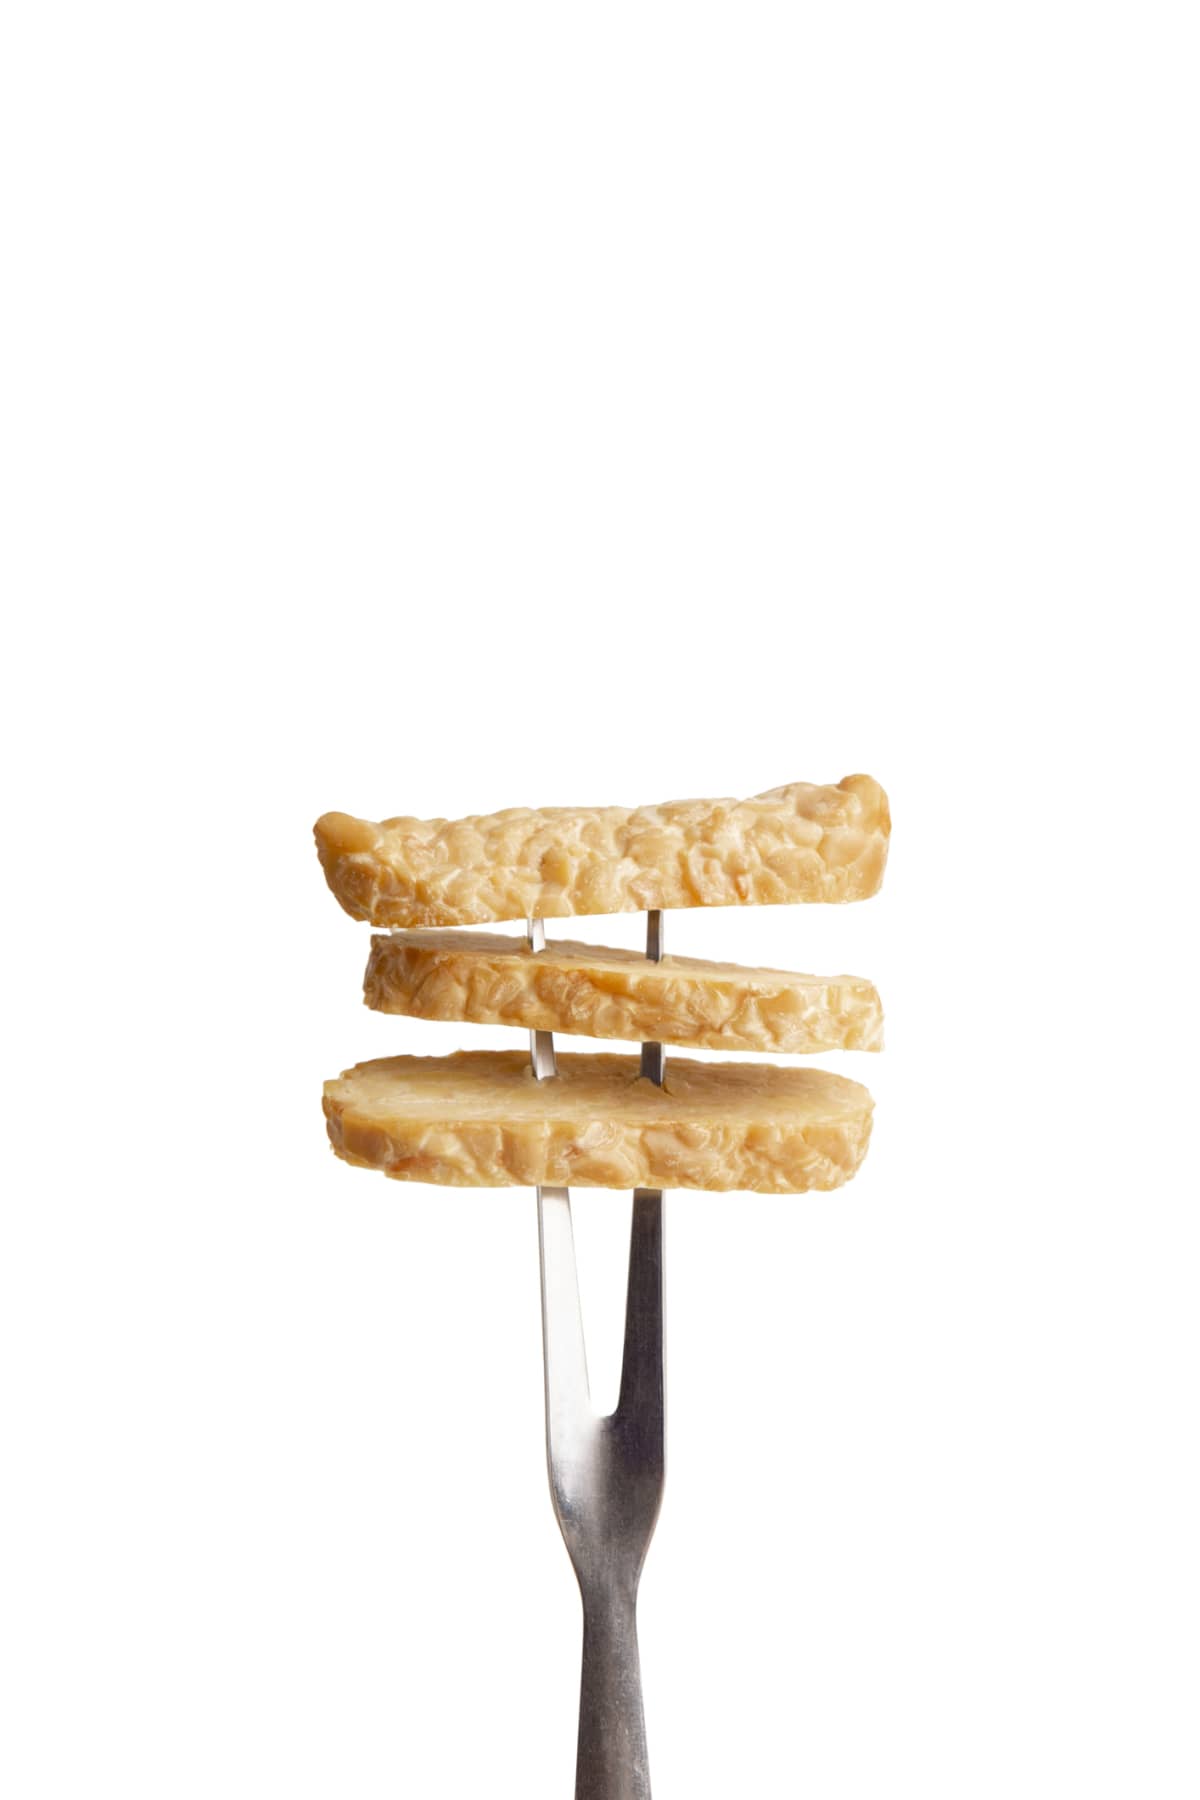 Three slices of tempeh on a fork